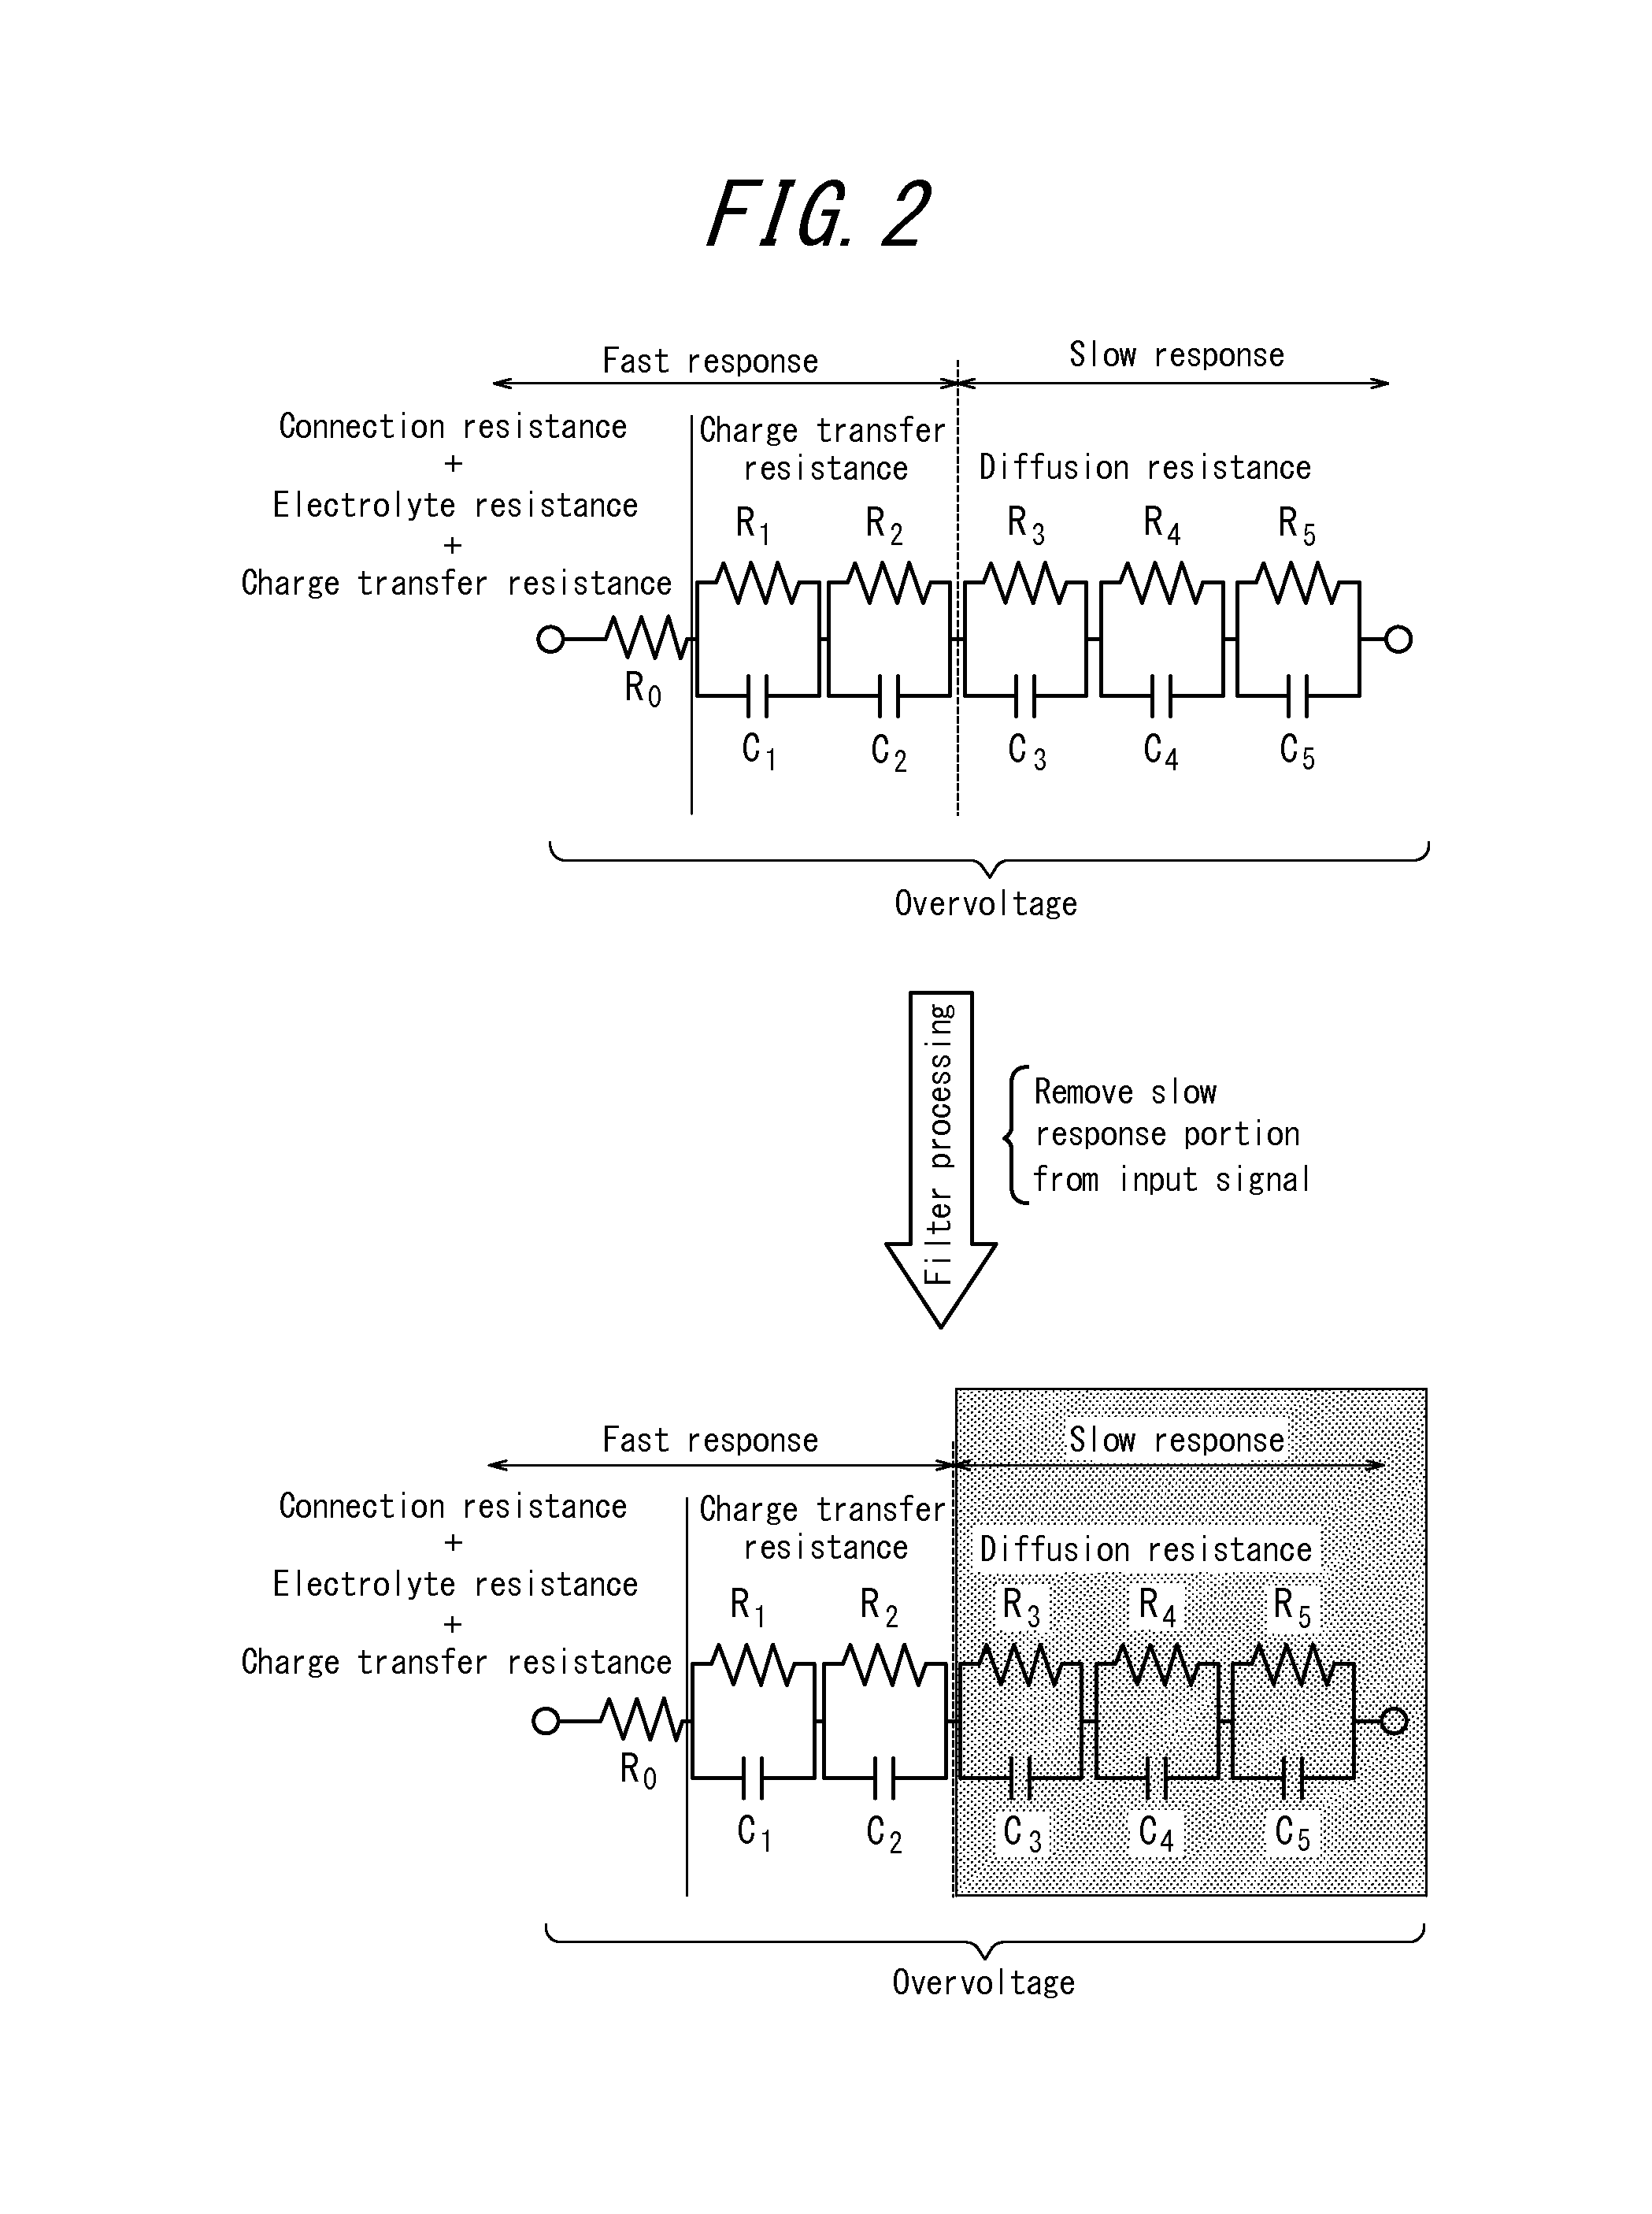 Apparatus for battery state estimation